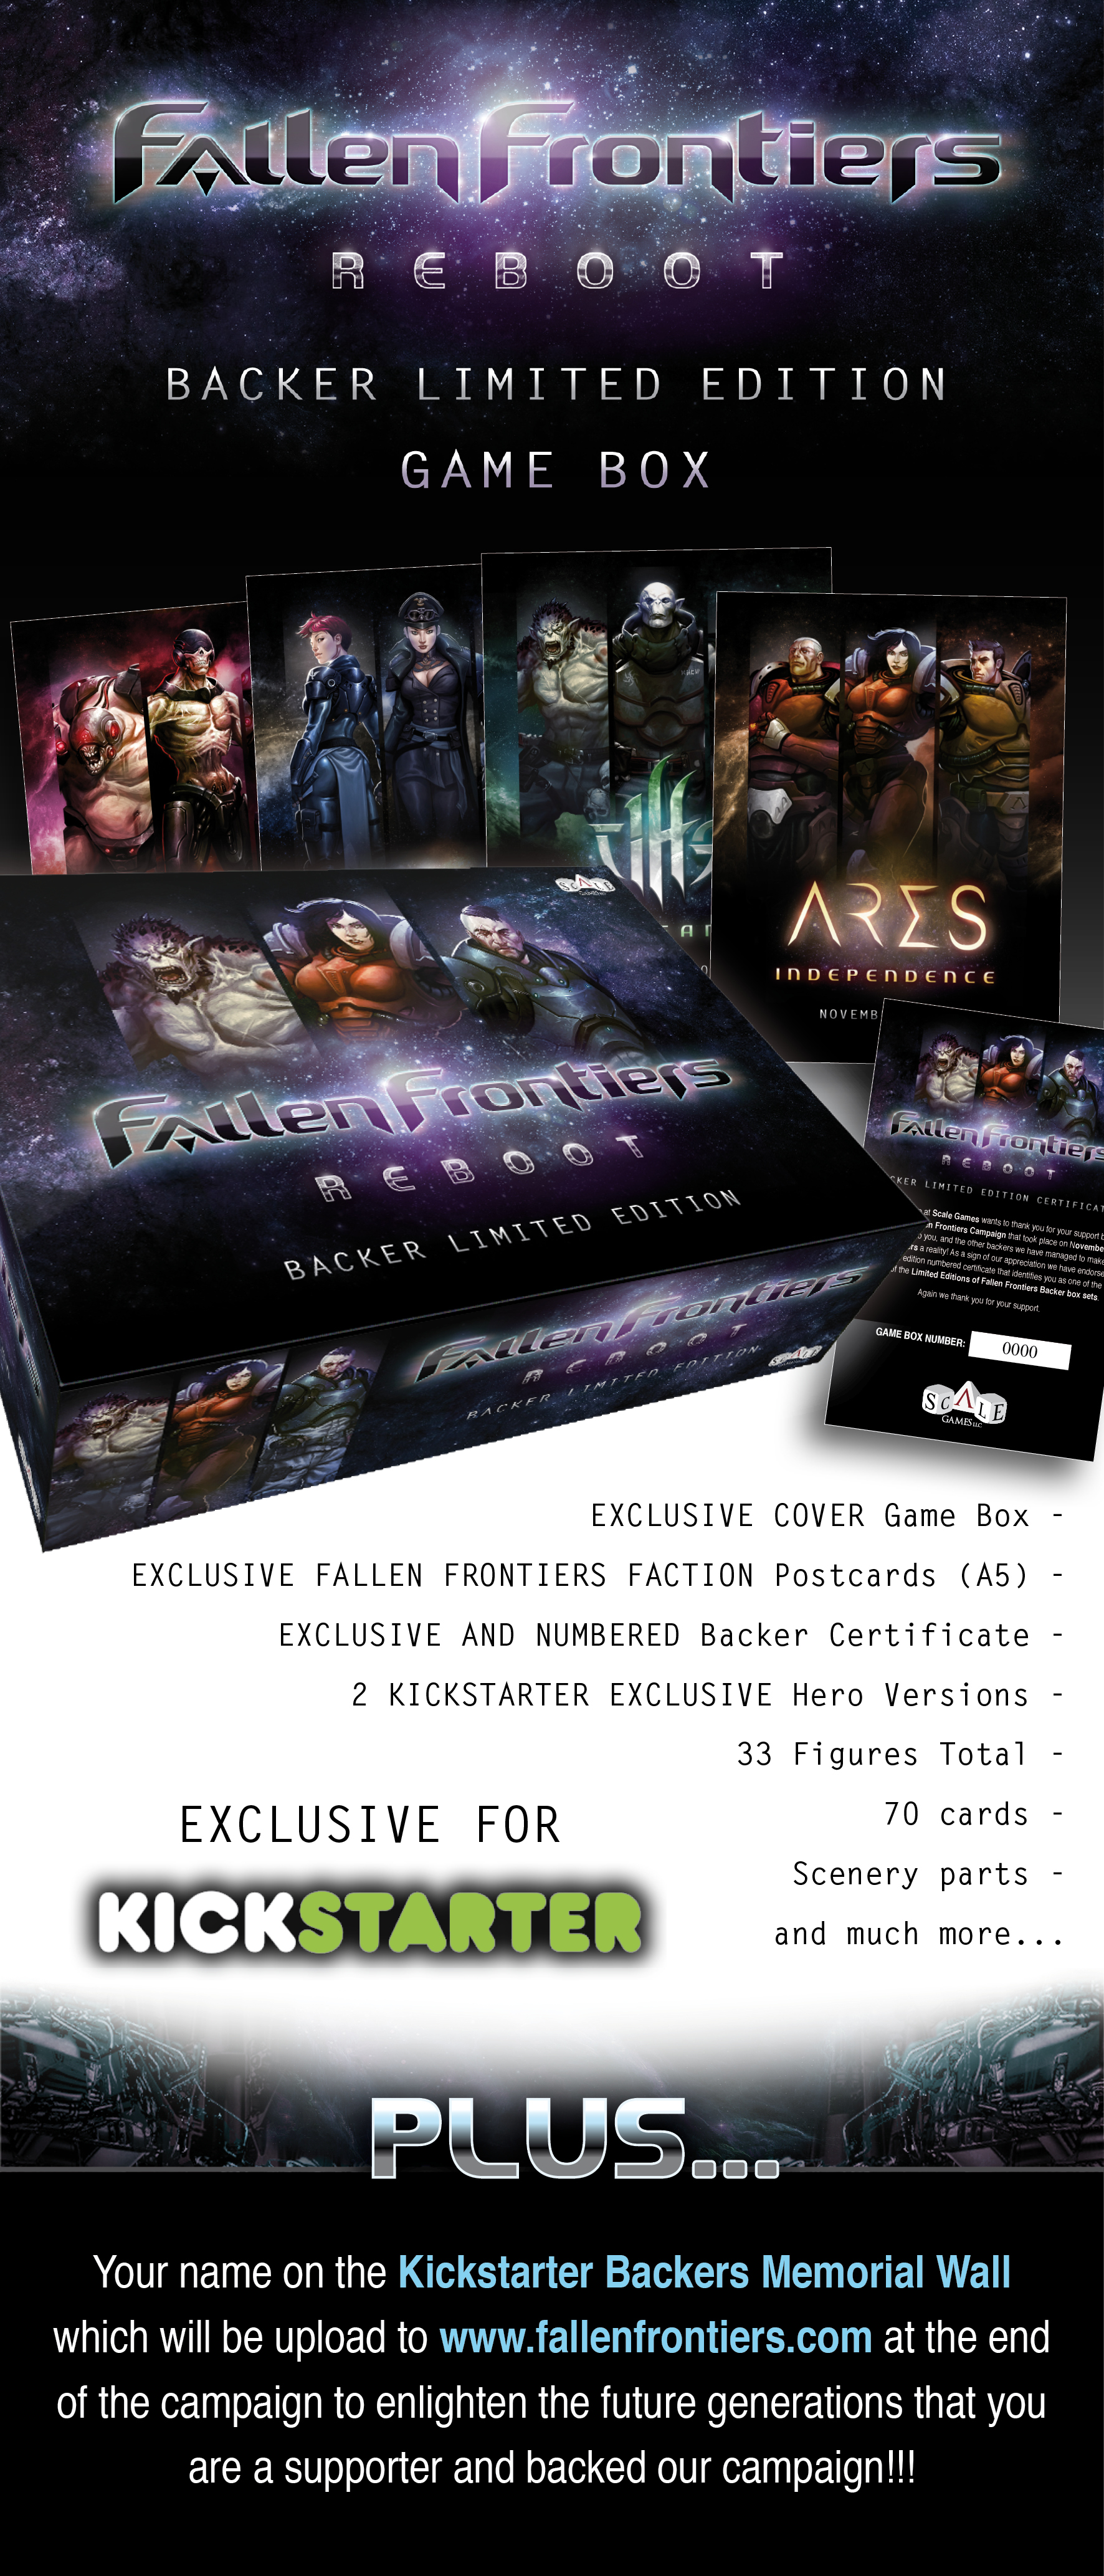 Fallen Frontiers Box Contents Revealed